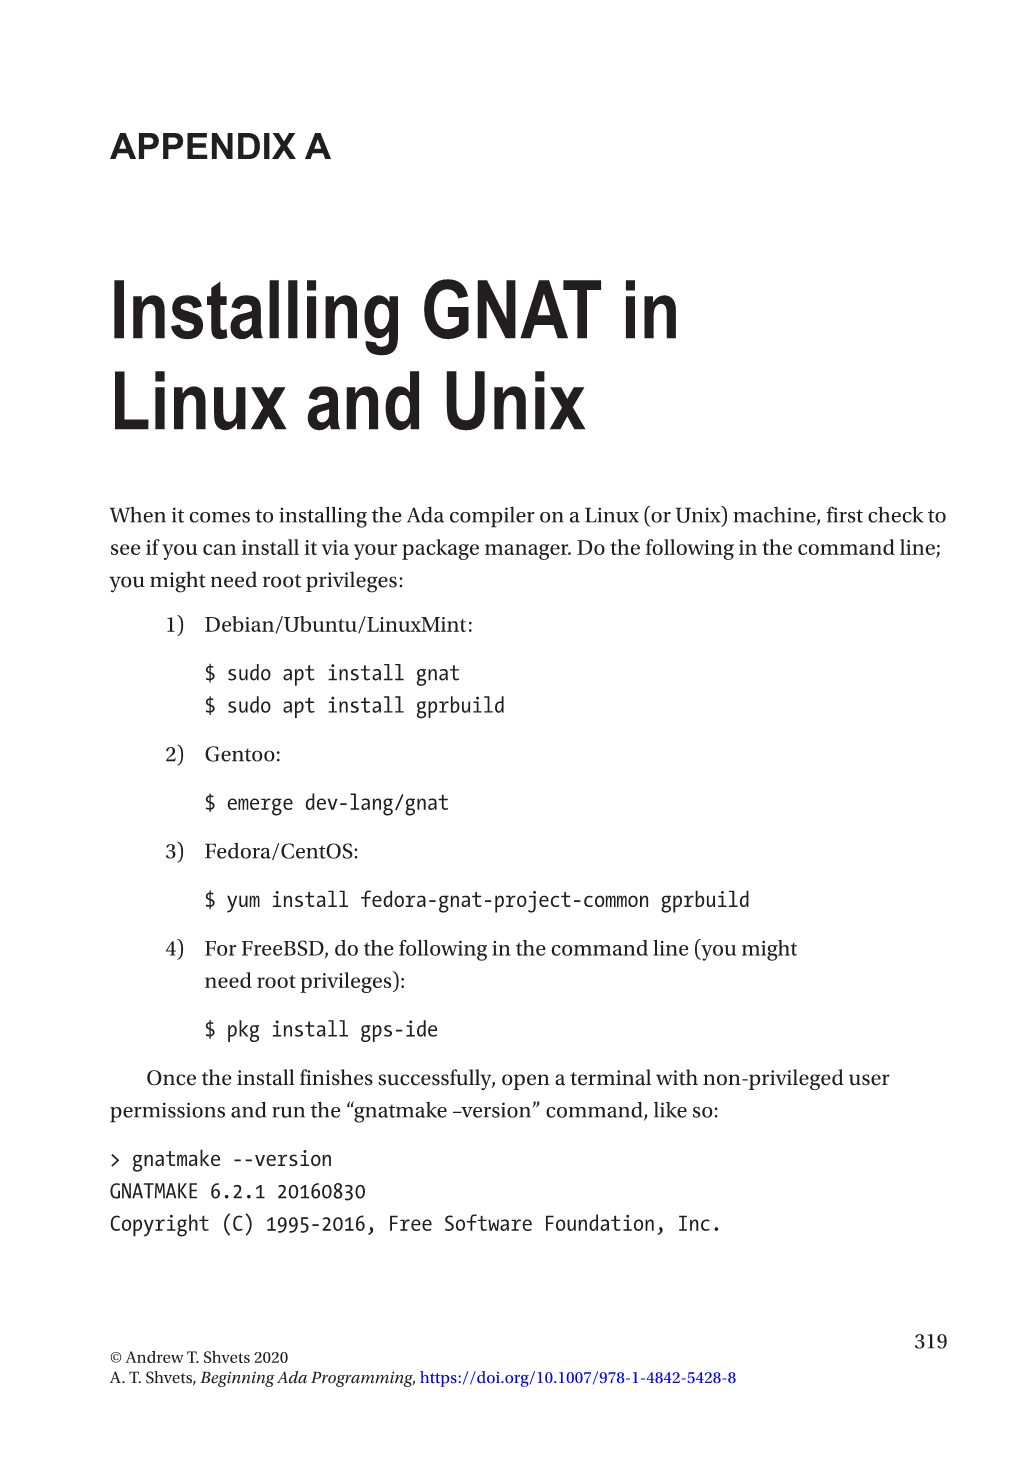 Installing GNAT in Linux and Unix